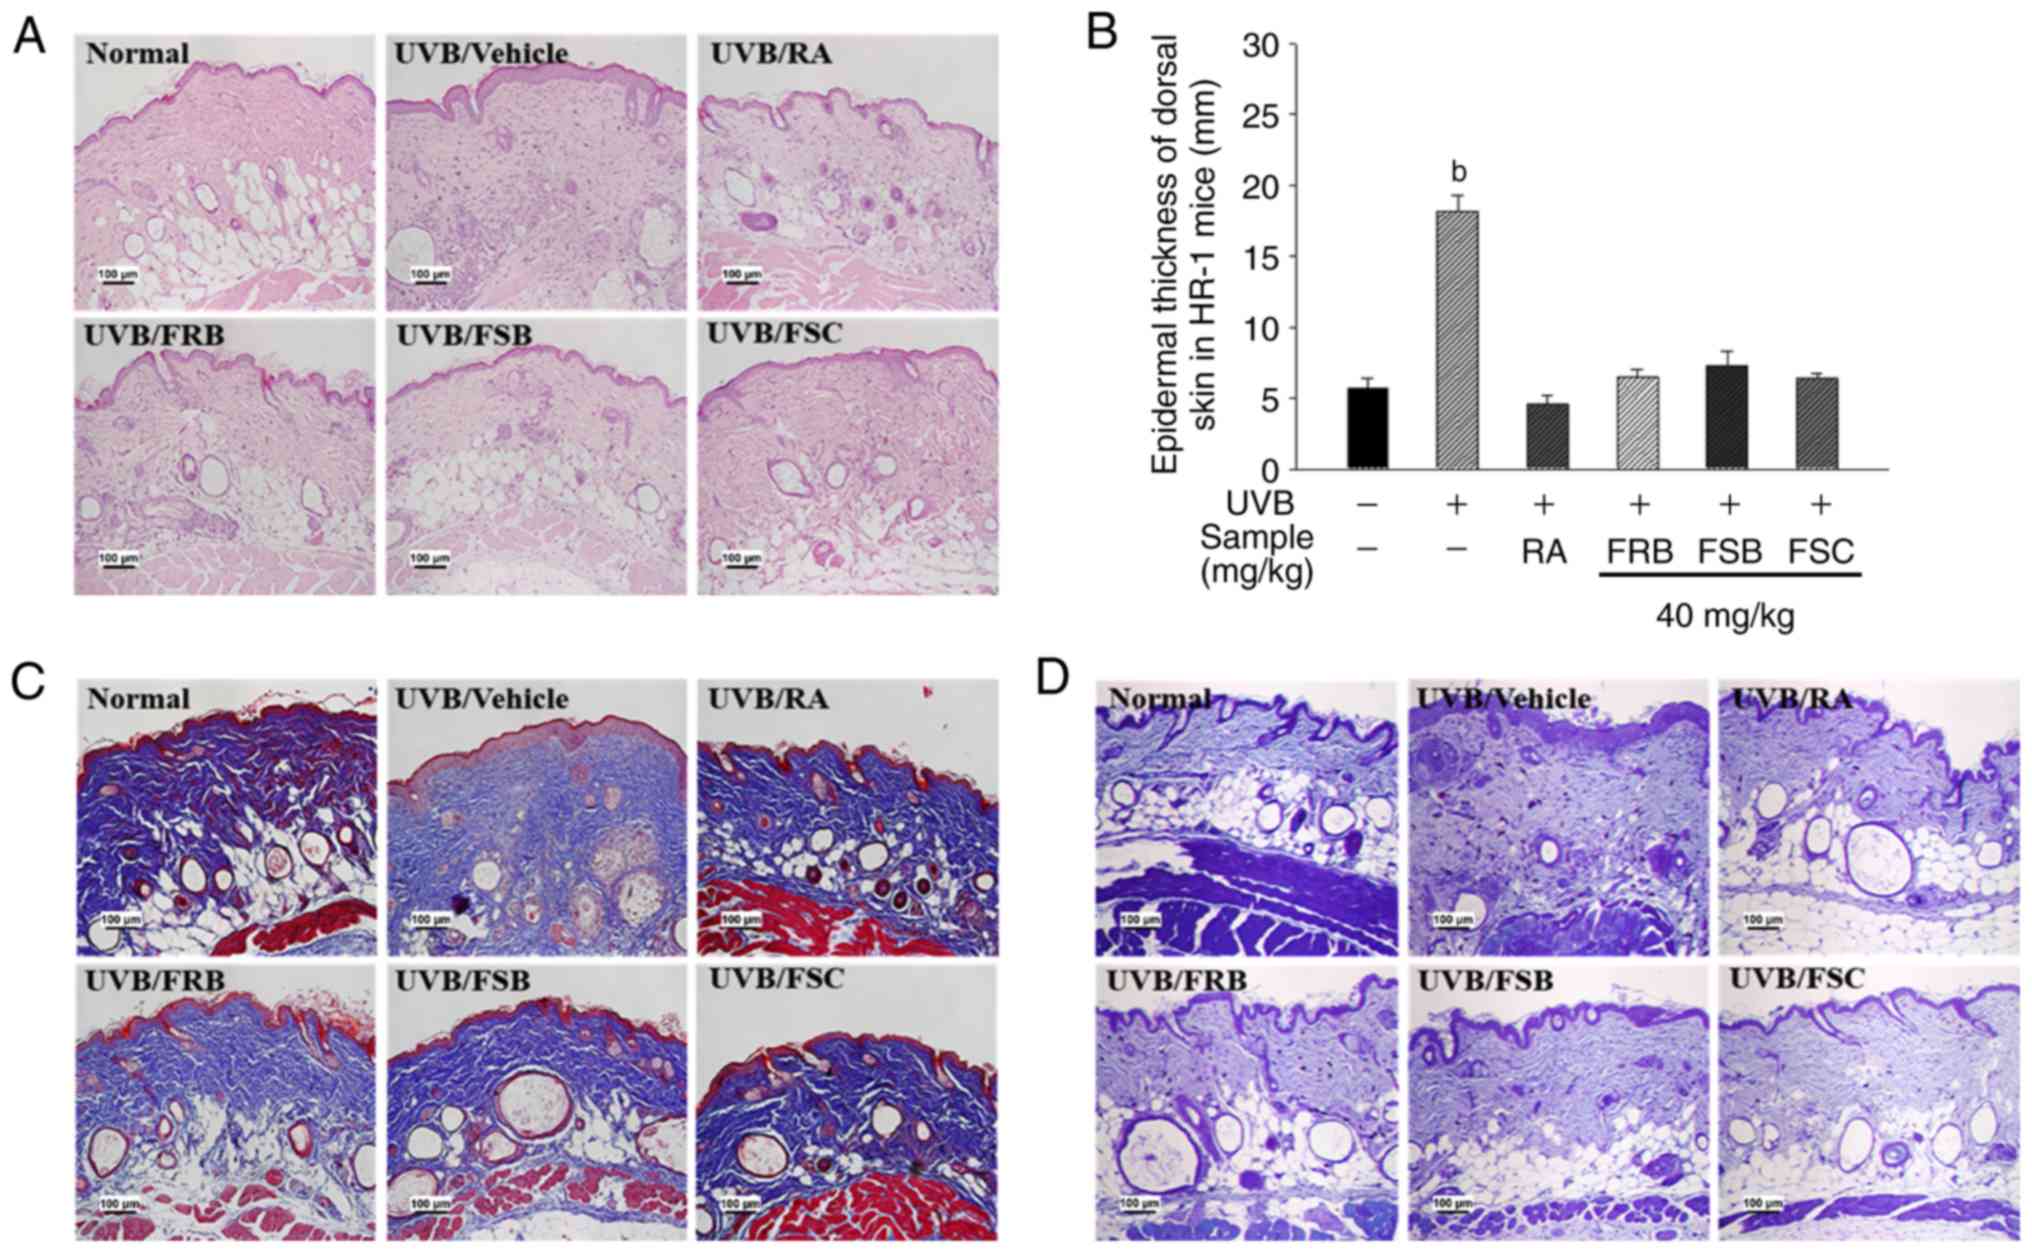 Anti Photoaging Effect Of Fermented Agricultural By Products On Ultraviolet B Irradiated Hairless Mouse Skin